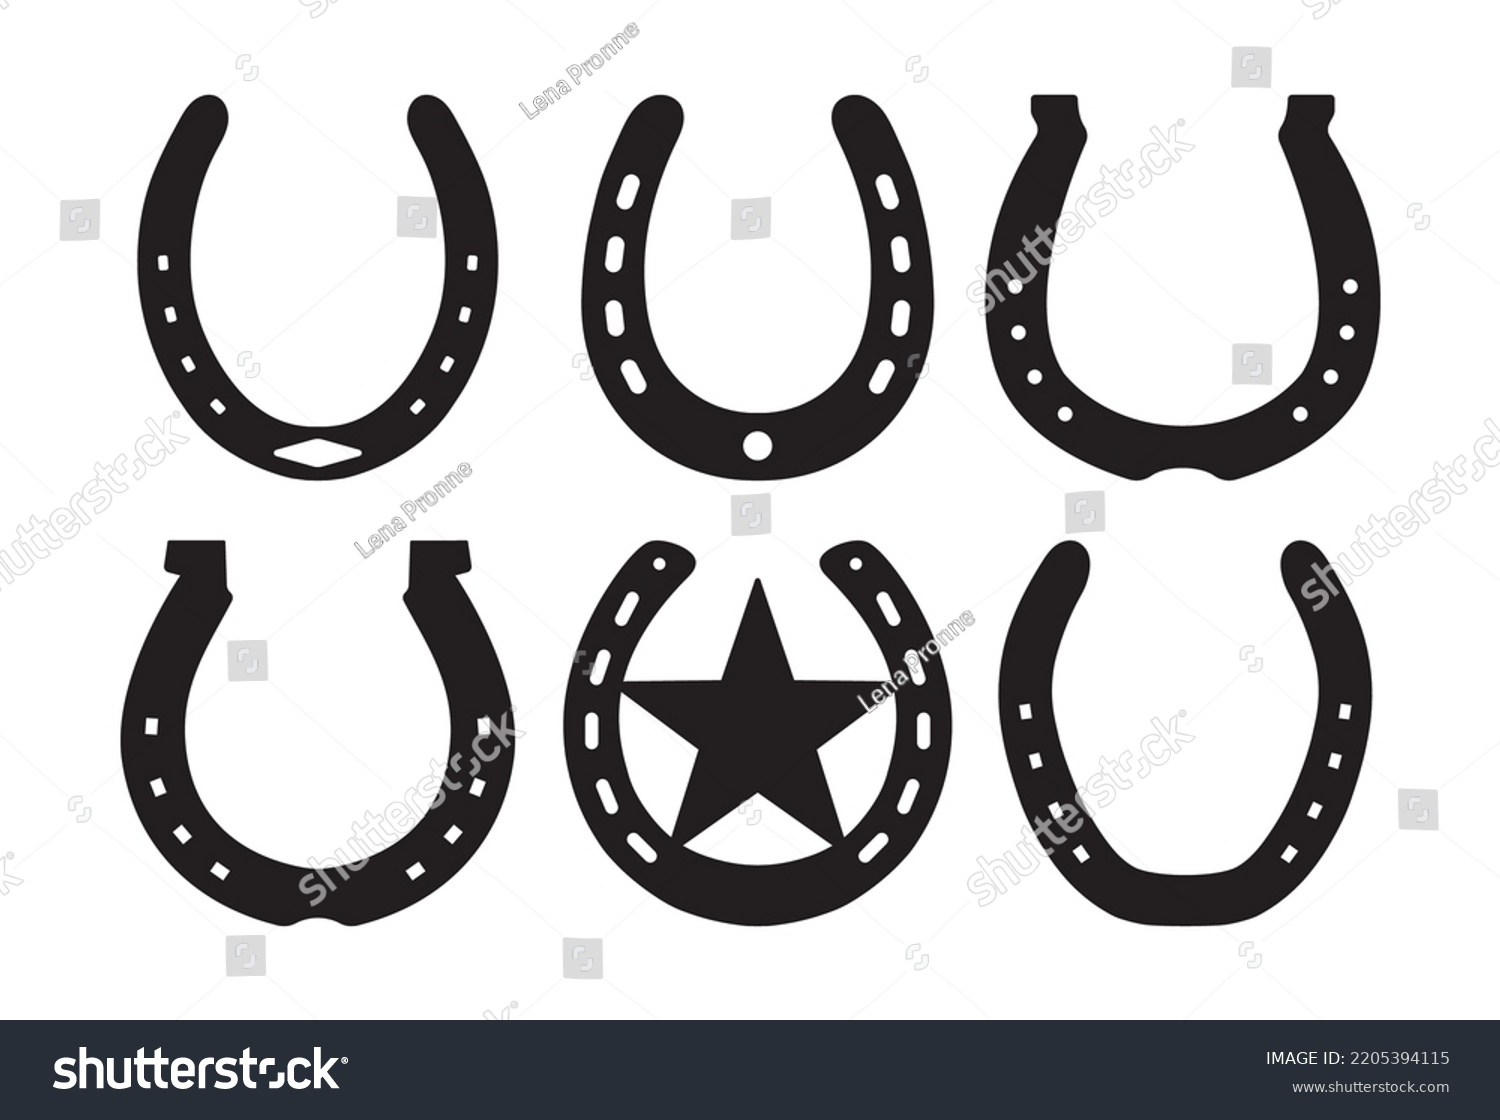 SVG of Horseshoe set stencil templates, lucky symbol silhouette bundle isolated svg